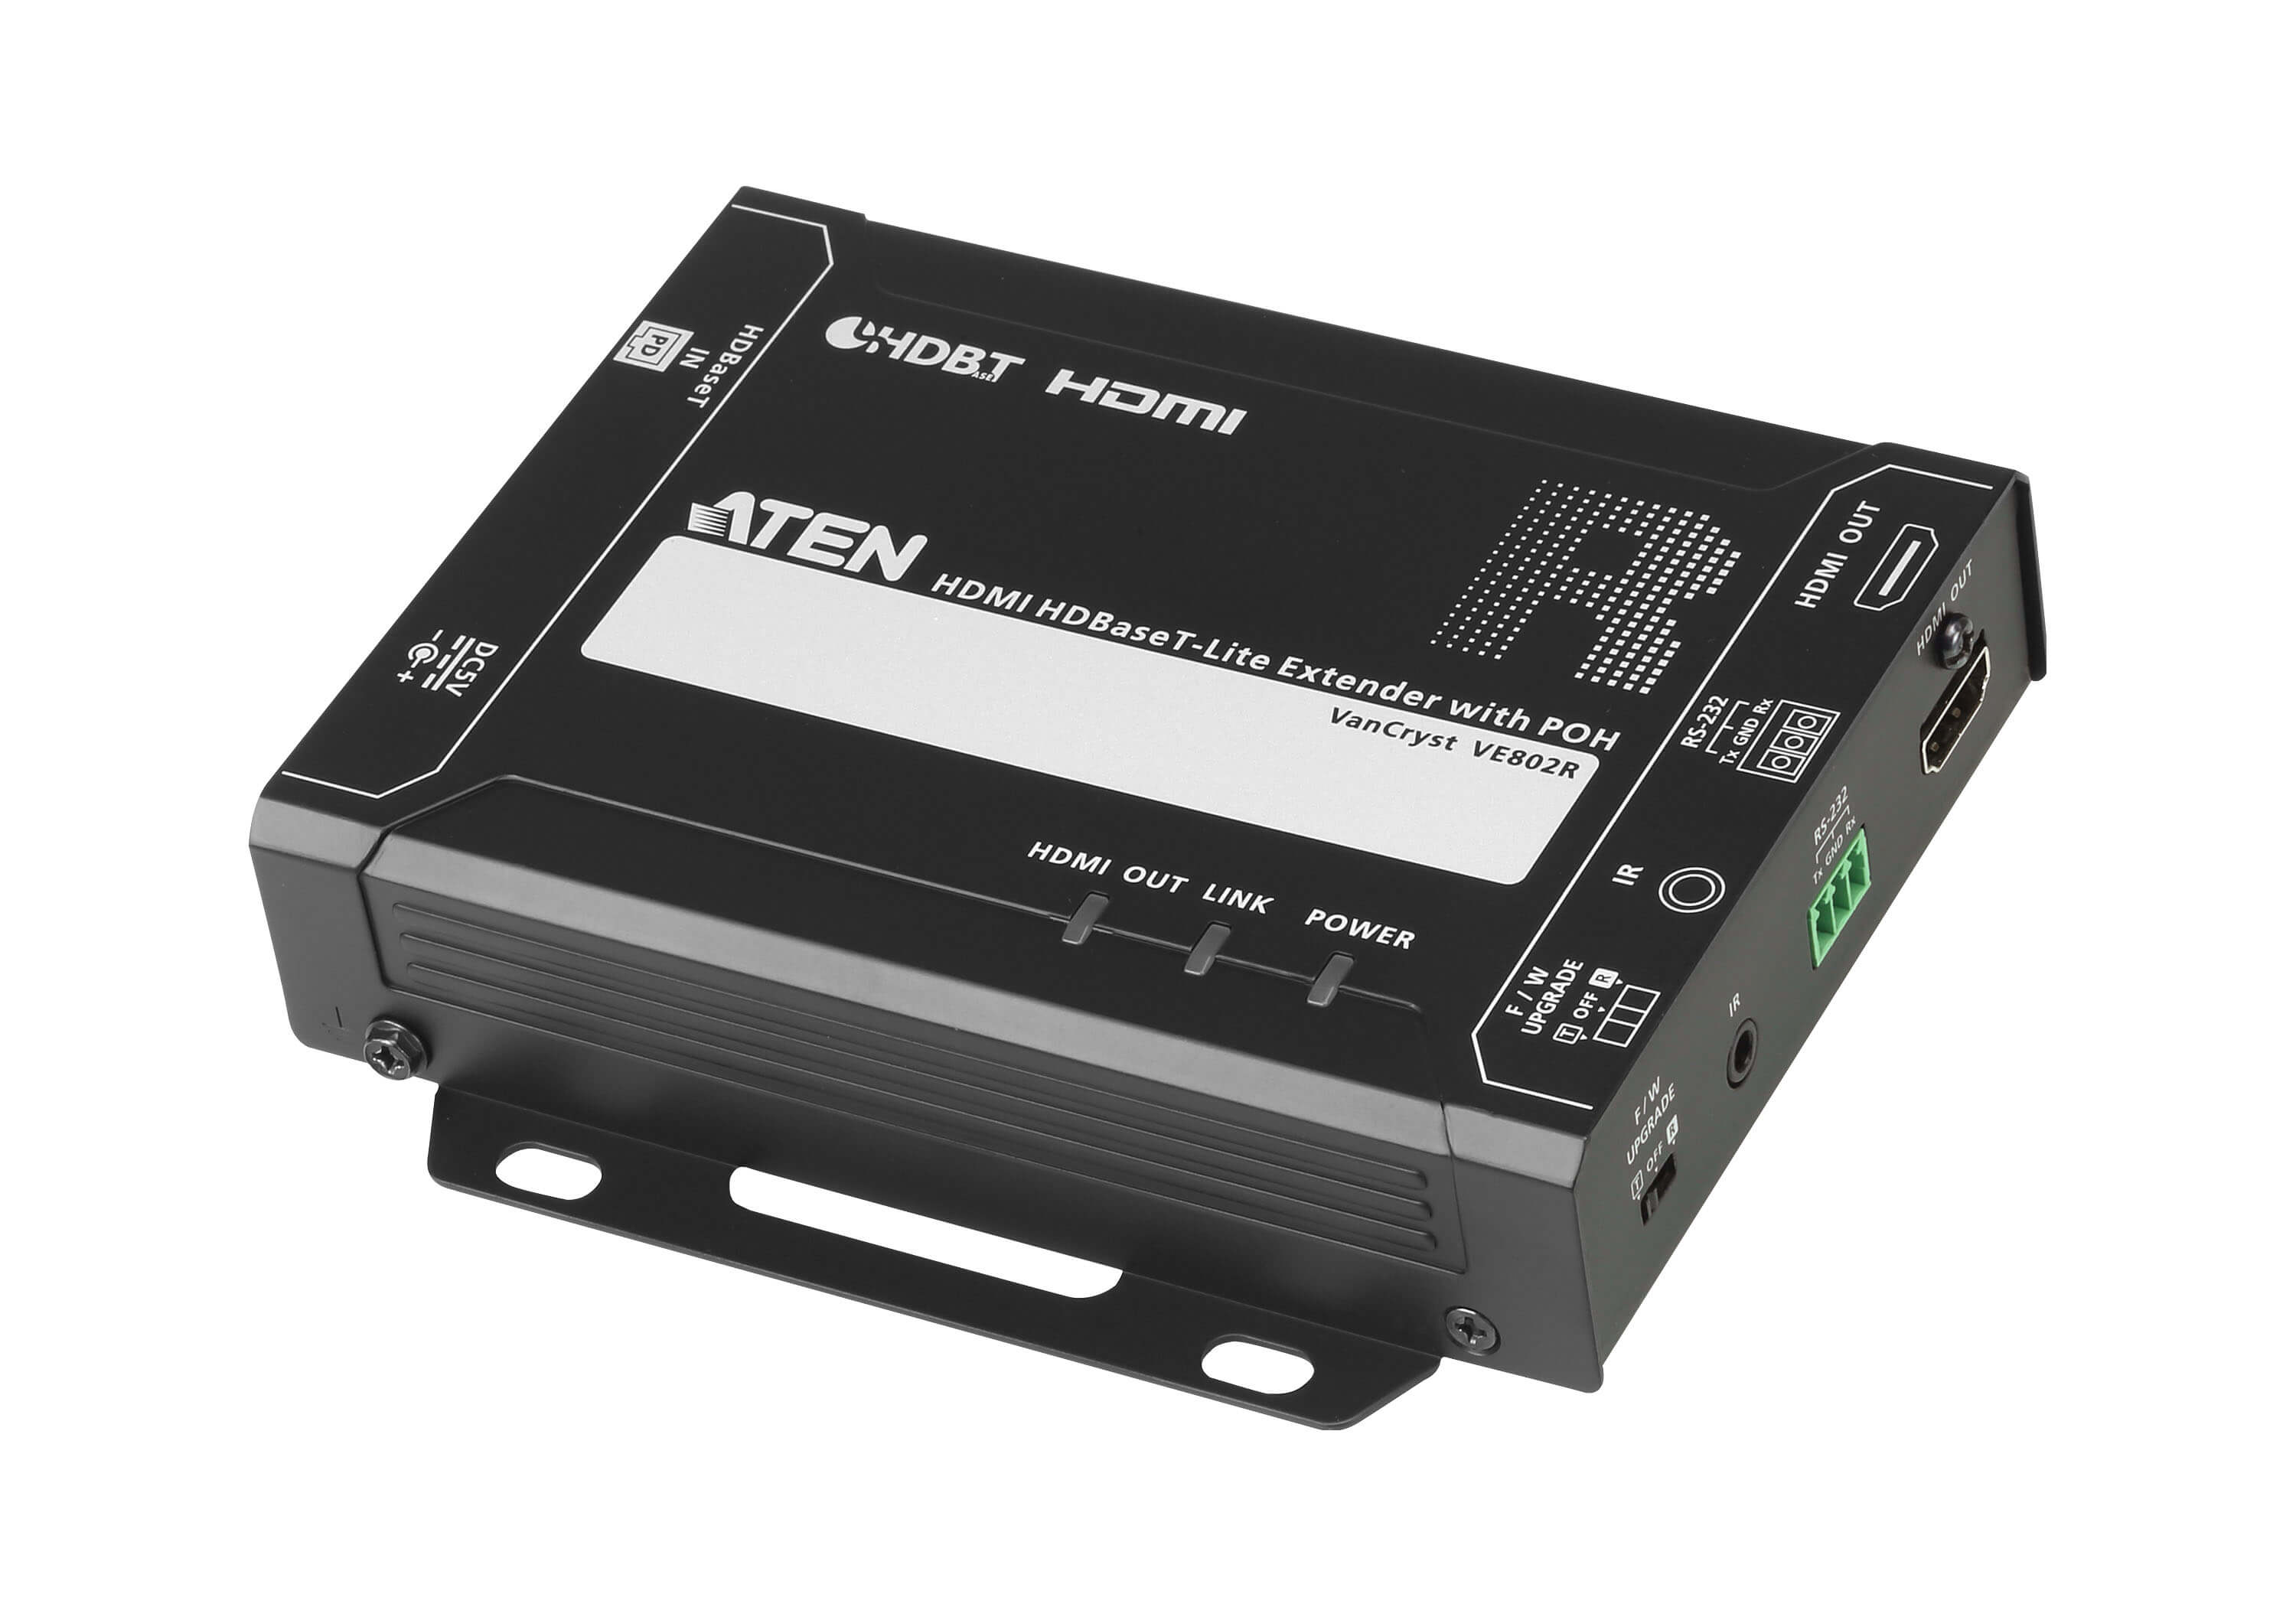 Aten HDMI HDBaseT-Lite Extender with POH